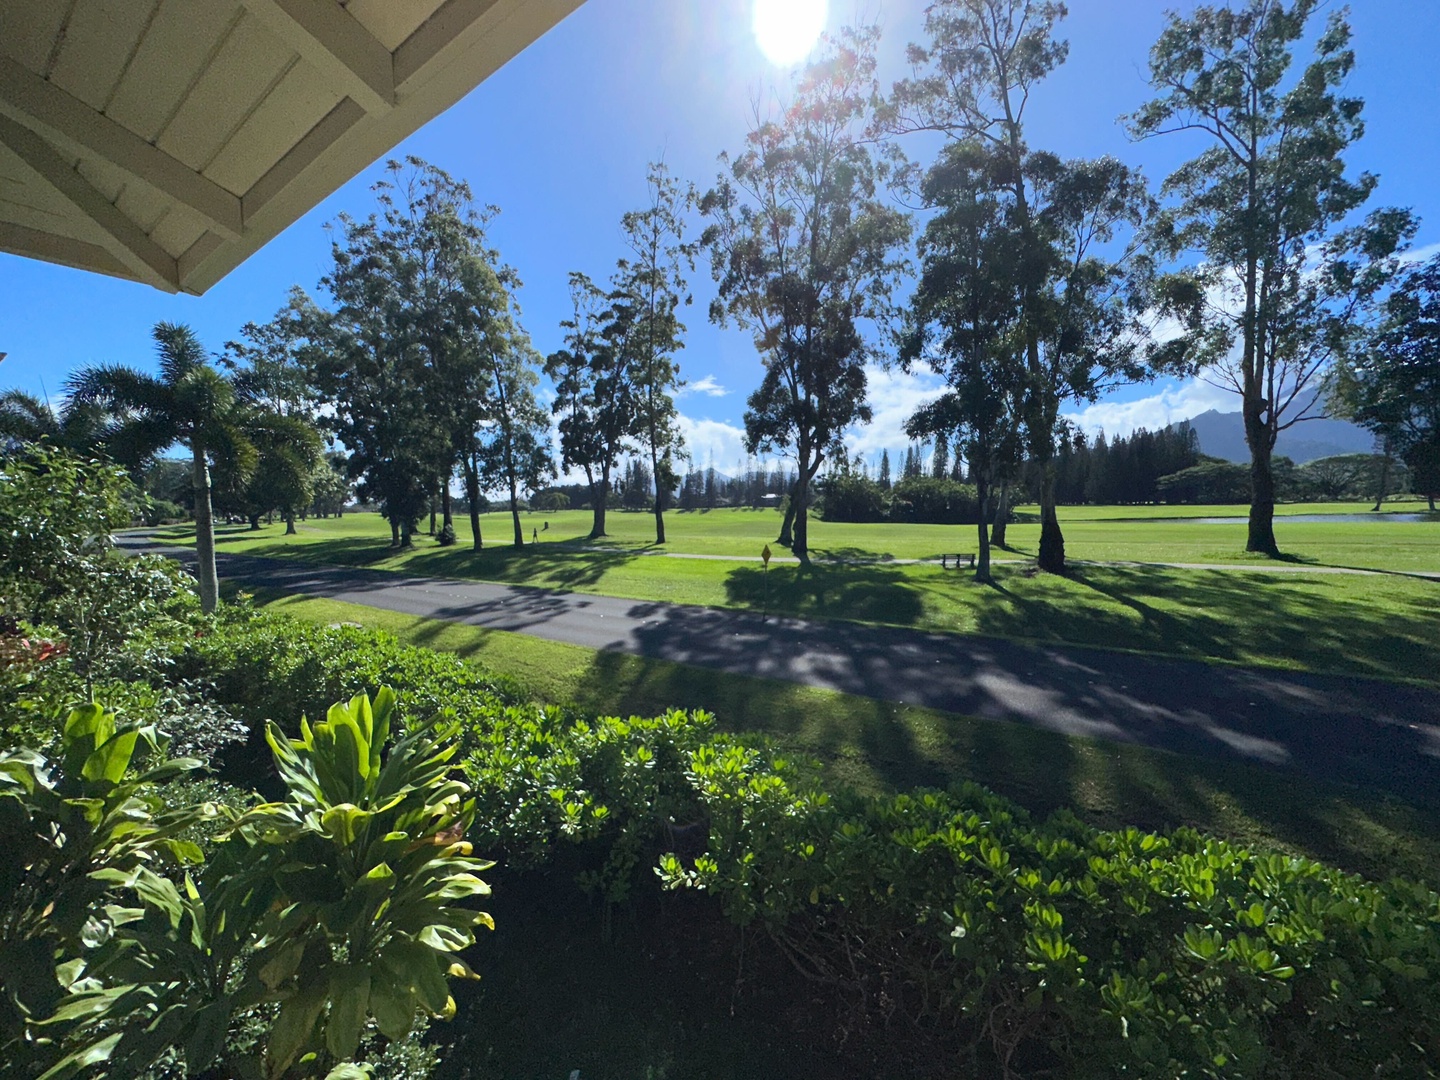 Princeville Vacation Rentals, Casa Makara - Tropical landscaping and peaceful views of the golf course.